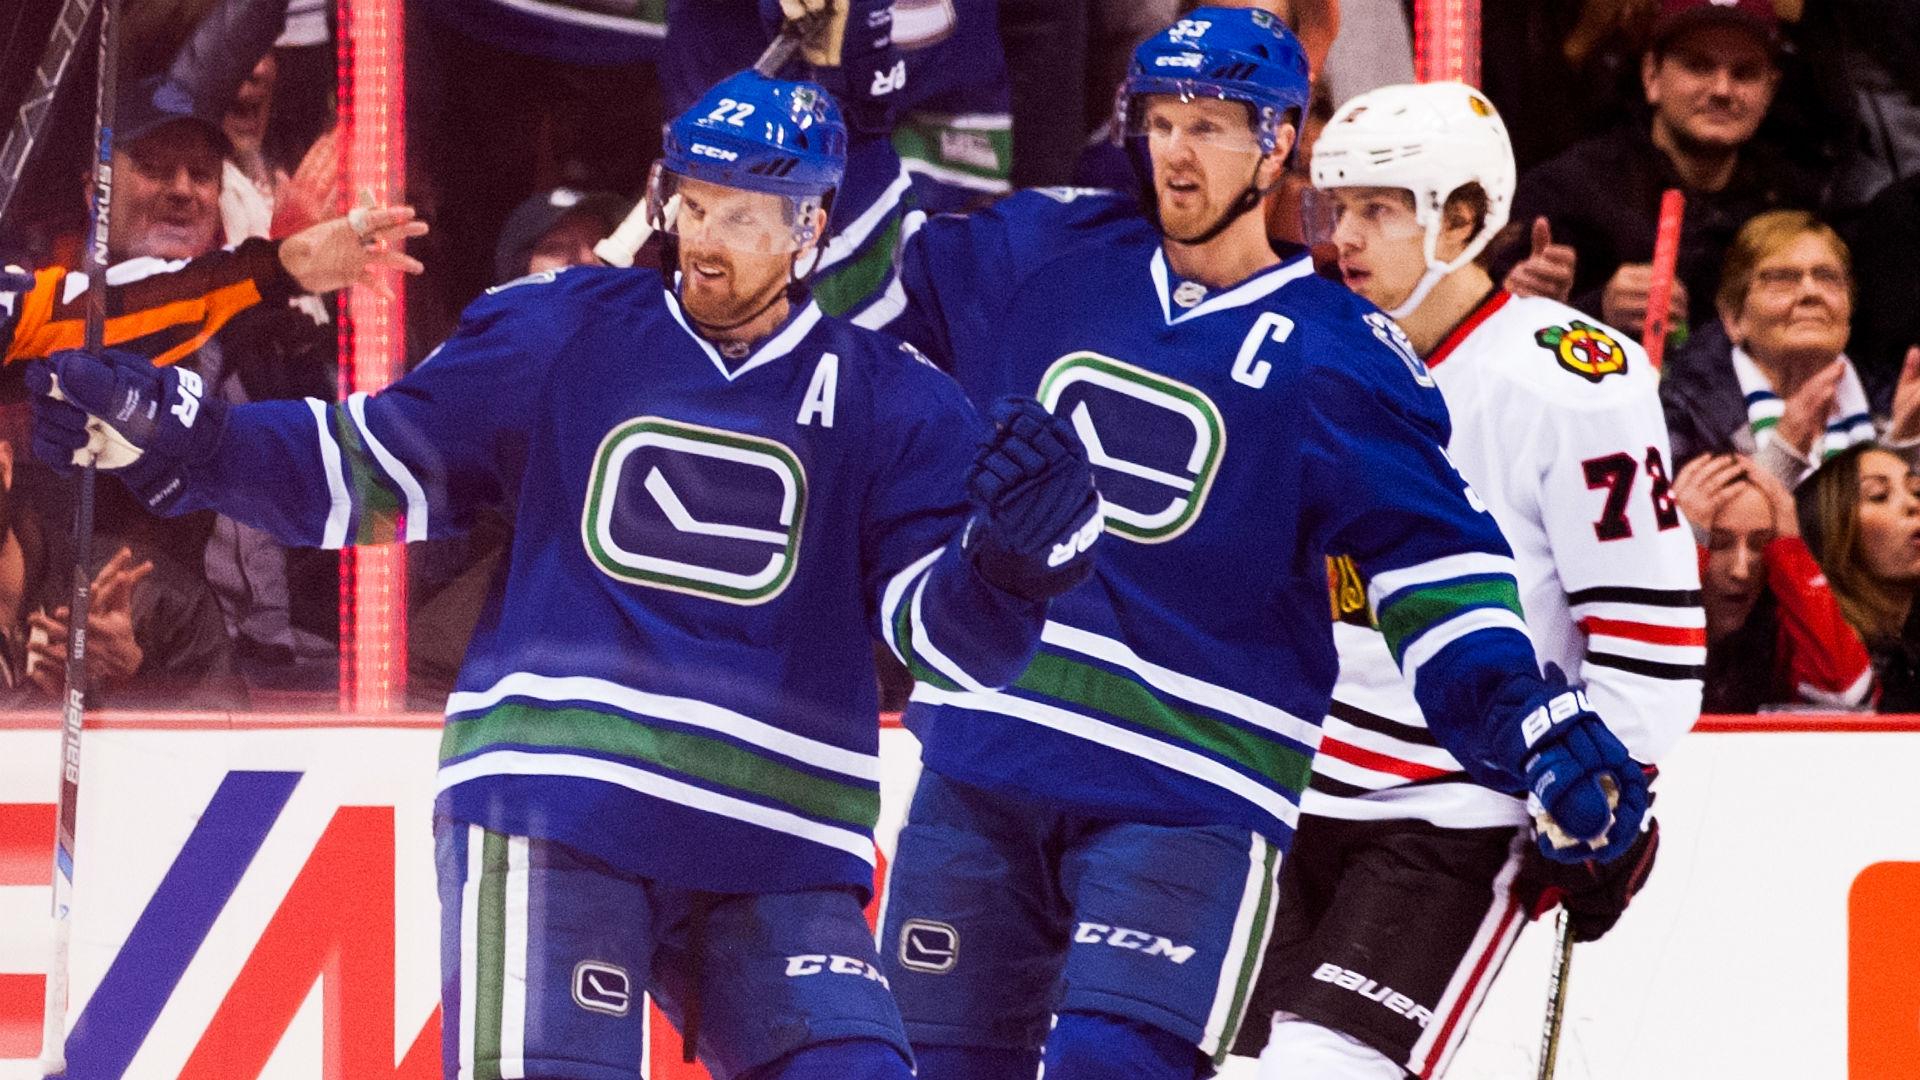 Green's success with Canucks hinges considerably on Sedin twins